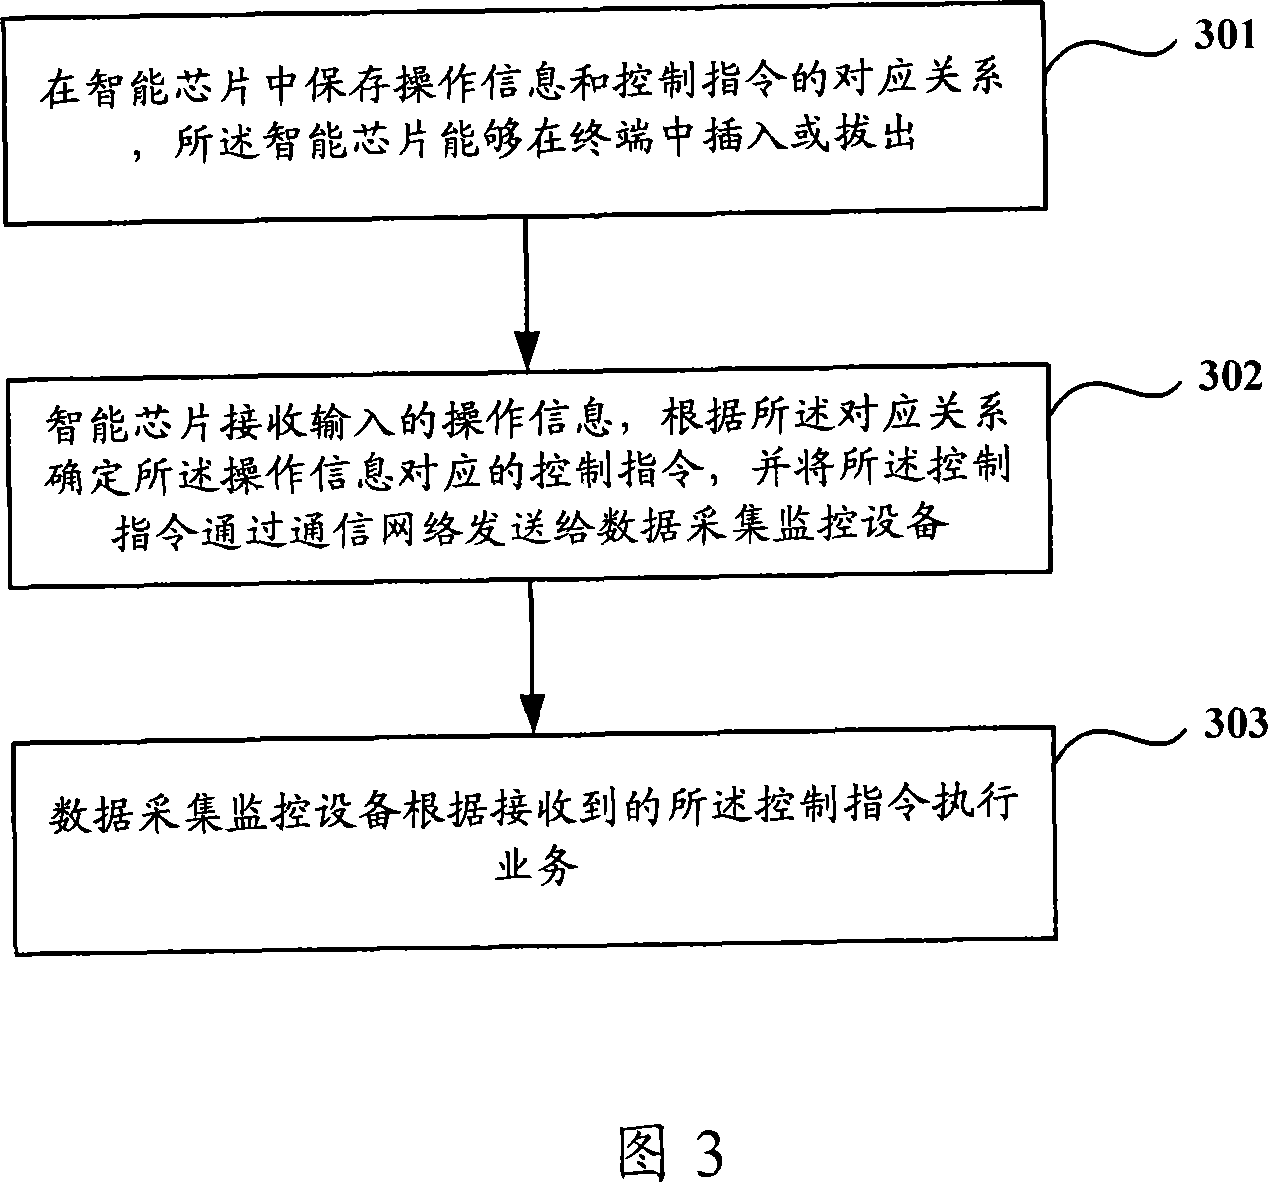 Method and system for remote control for data collection and monitoring apparatus